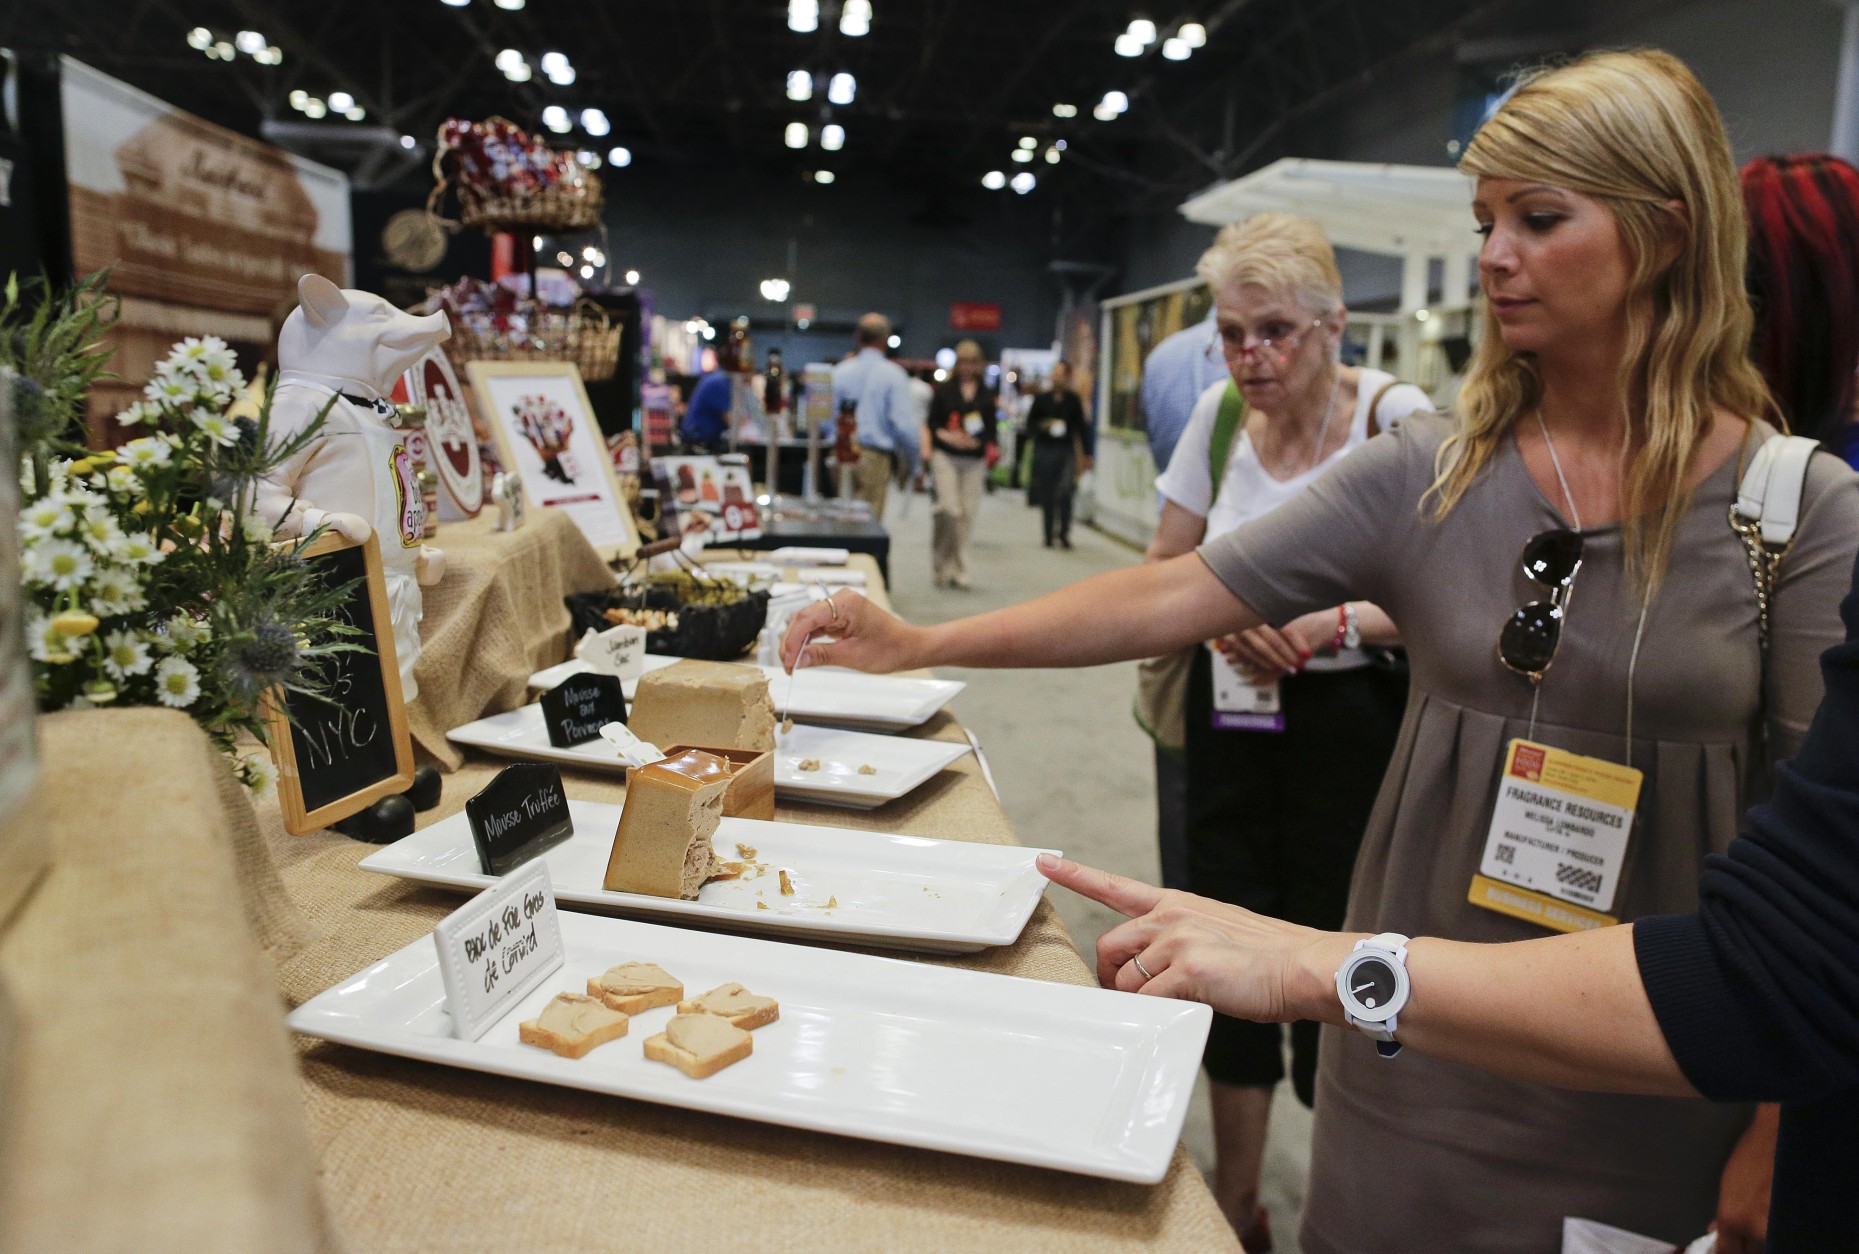 CORRECTS FIGURES- Convention goers sample a variety of pates at the Summer Fancy Food Show specialty food convention, Tuesday, July 1, 2014, in New York. About 90,000 pounds of delicacies were donated and distributed to food pantries across the five boroughs. (AP Photo/Julie Jacobson)